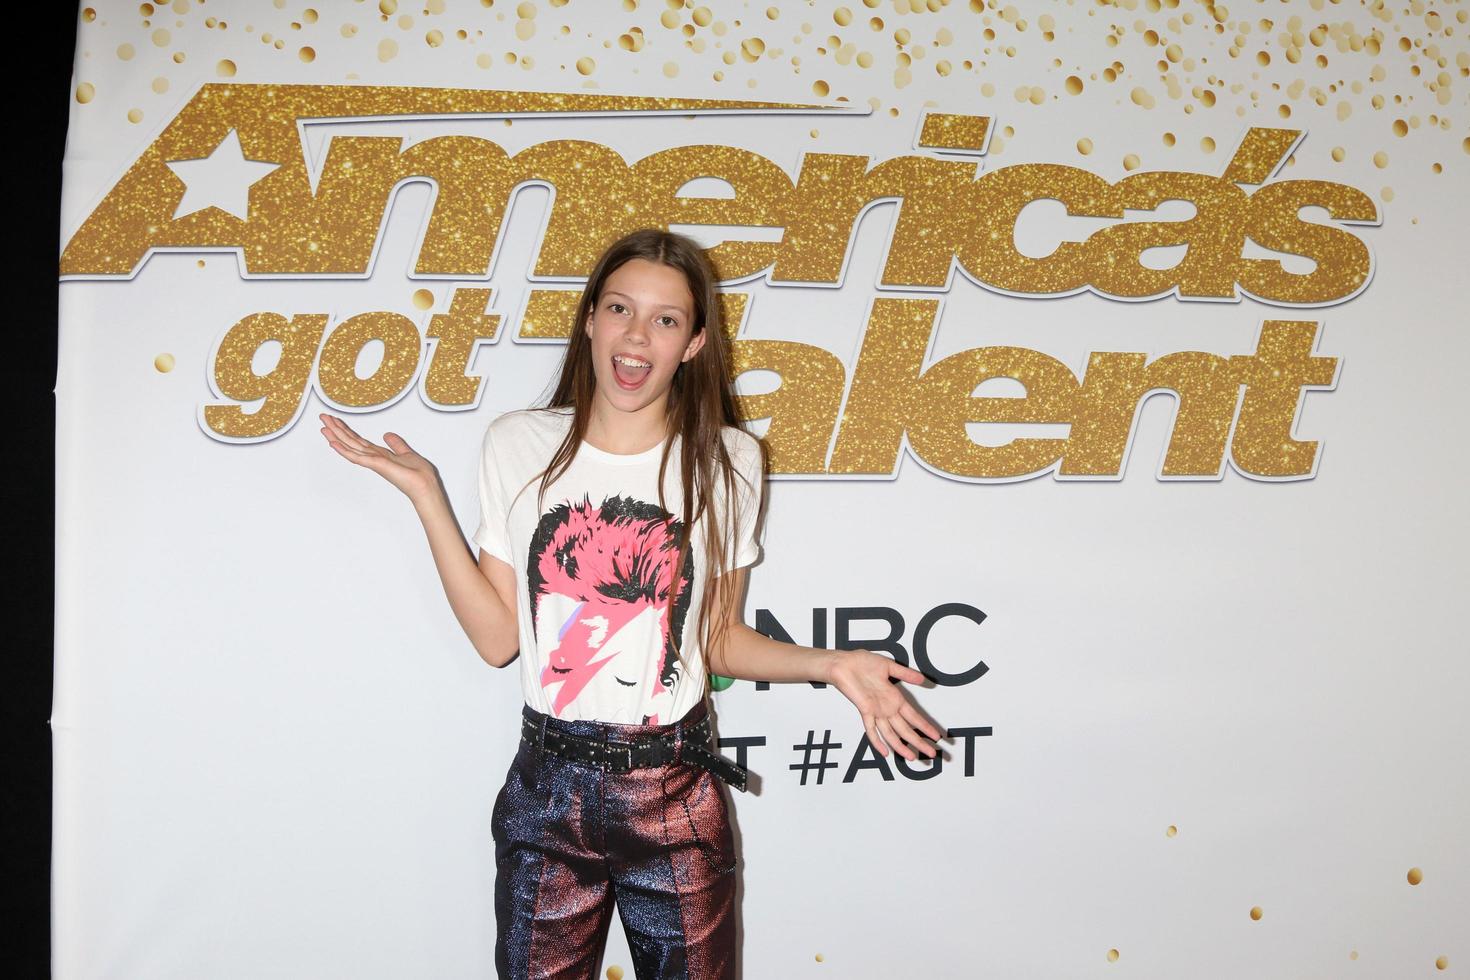 LOS ANGELES, SEP 19 - Courtney Hadwin at the Americas Got Talent Crowns Winner Red Carpet at the Dolby Theater on September 19, 2018 in Los Angeles, CA photo